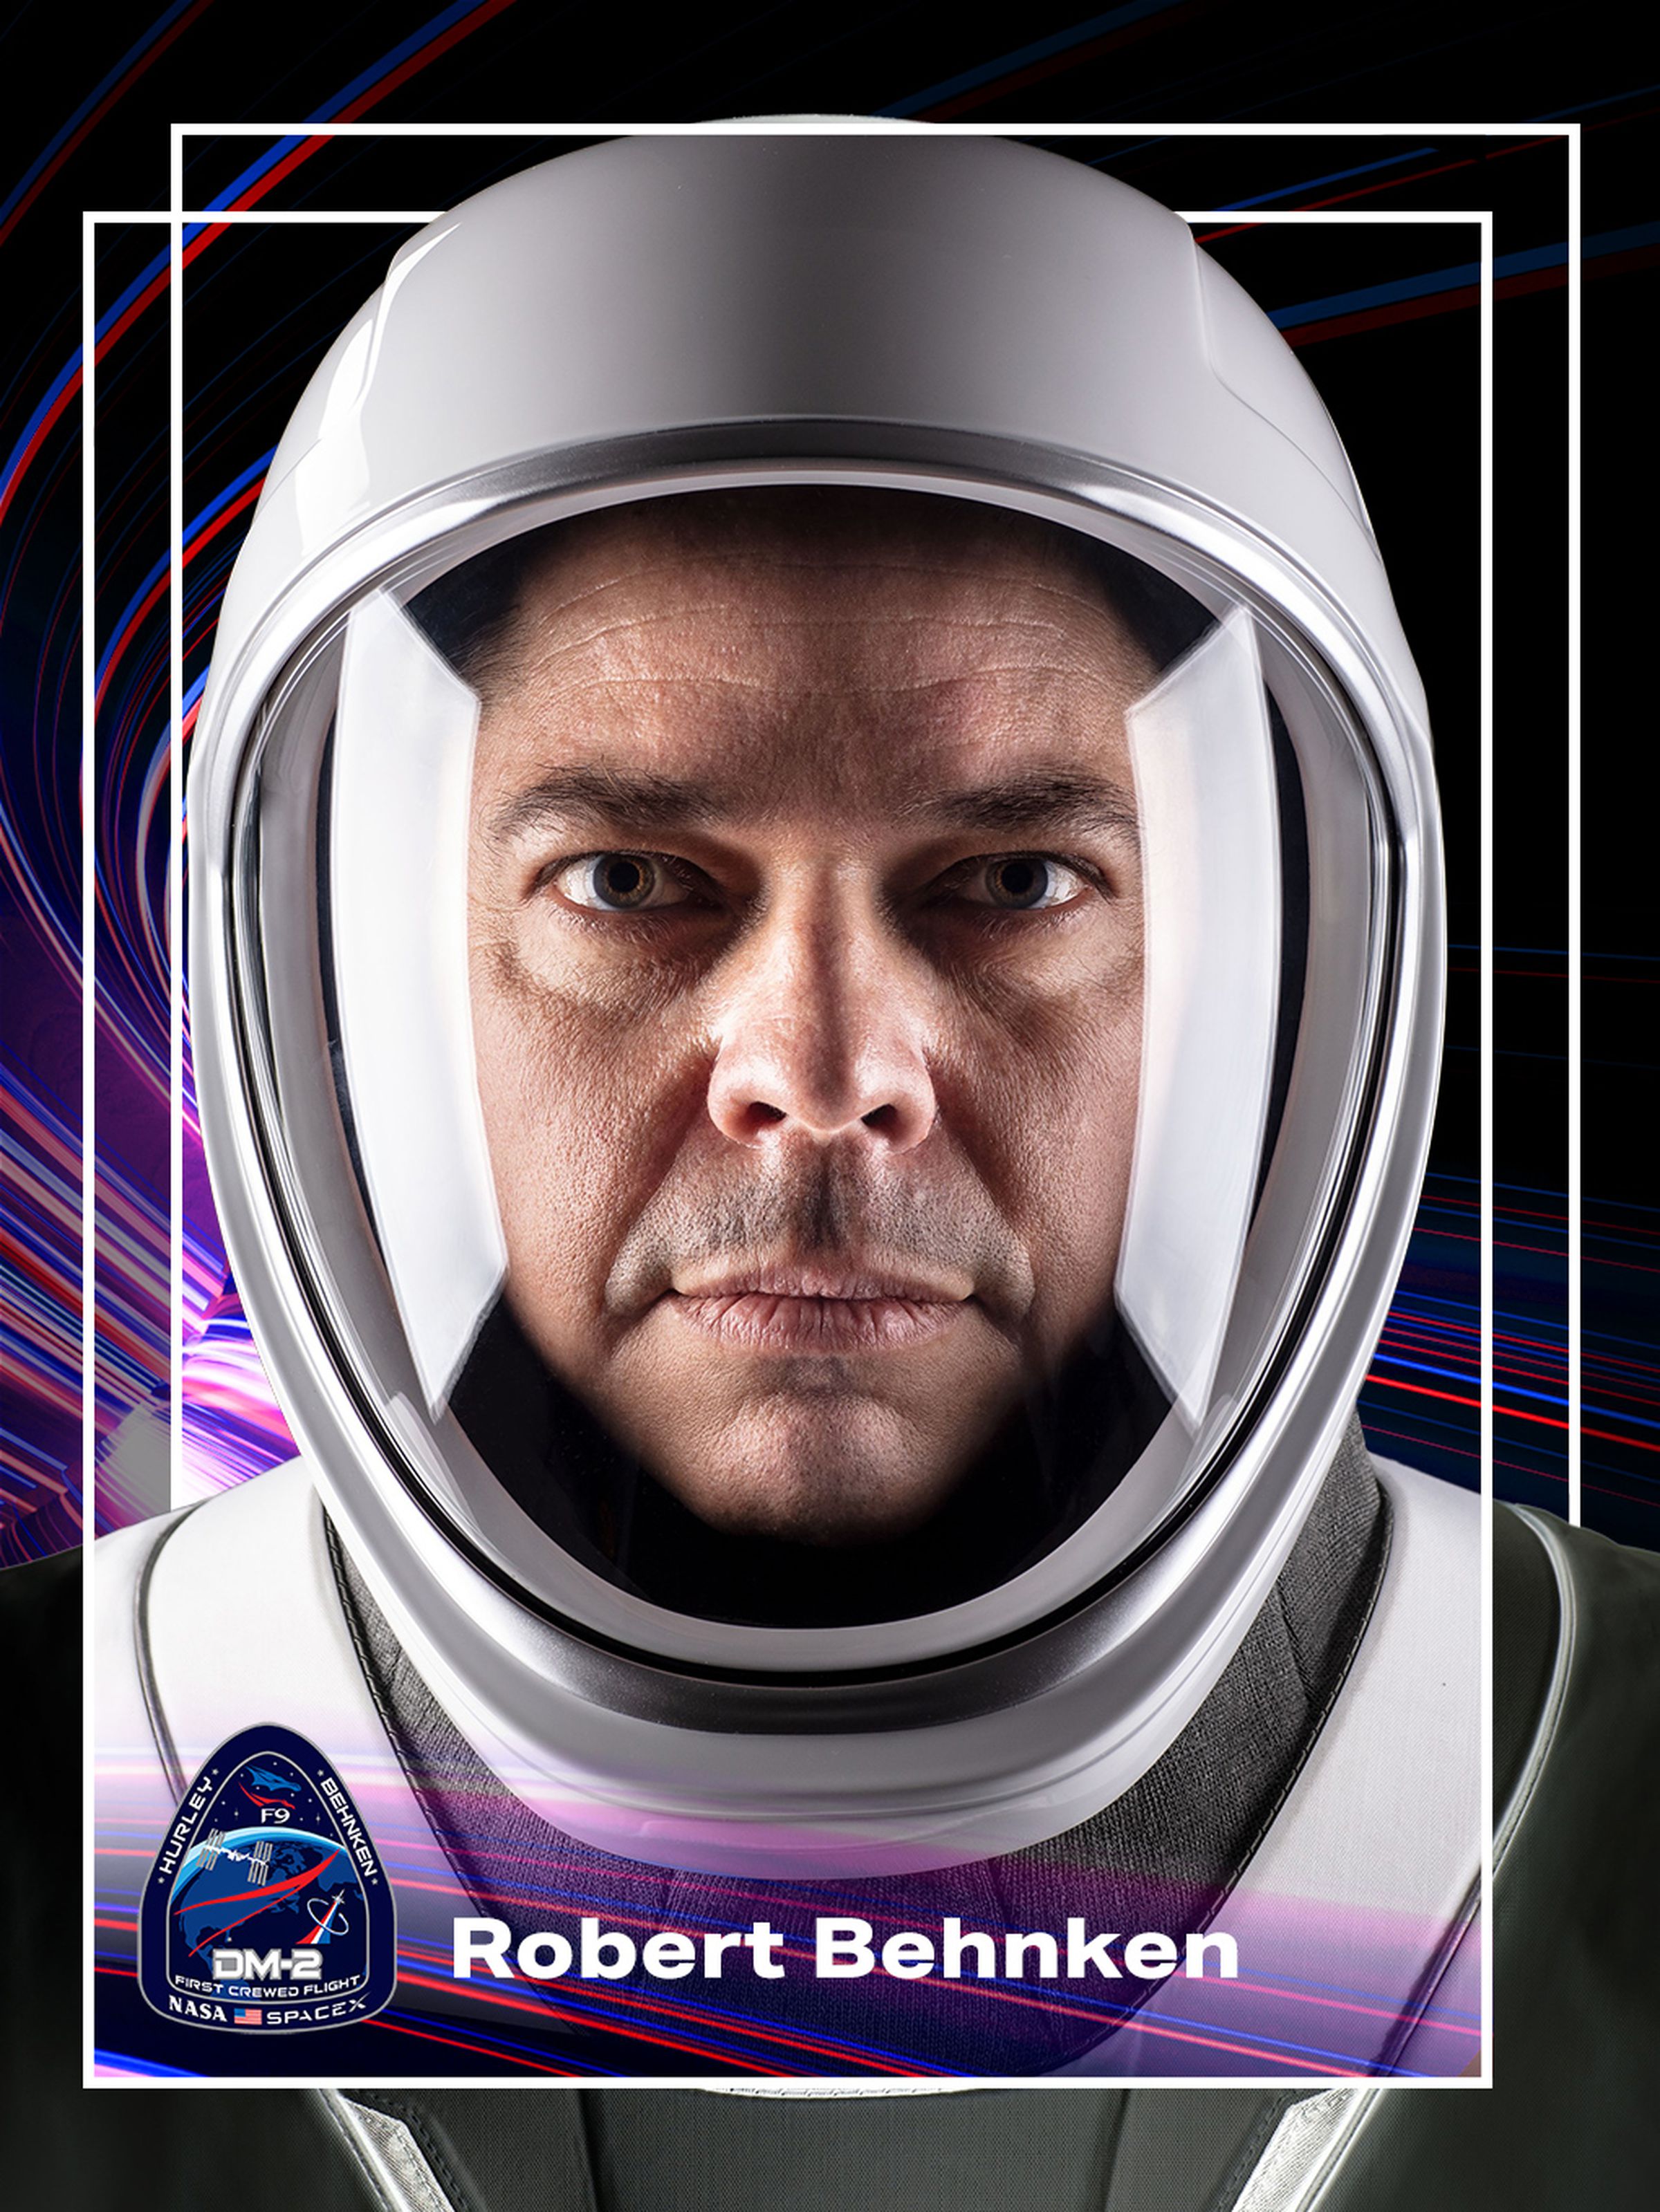 A graphic of astronaut Robert Behnken made to look like the front of a trading card